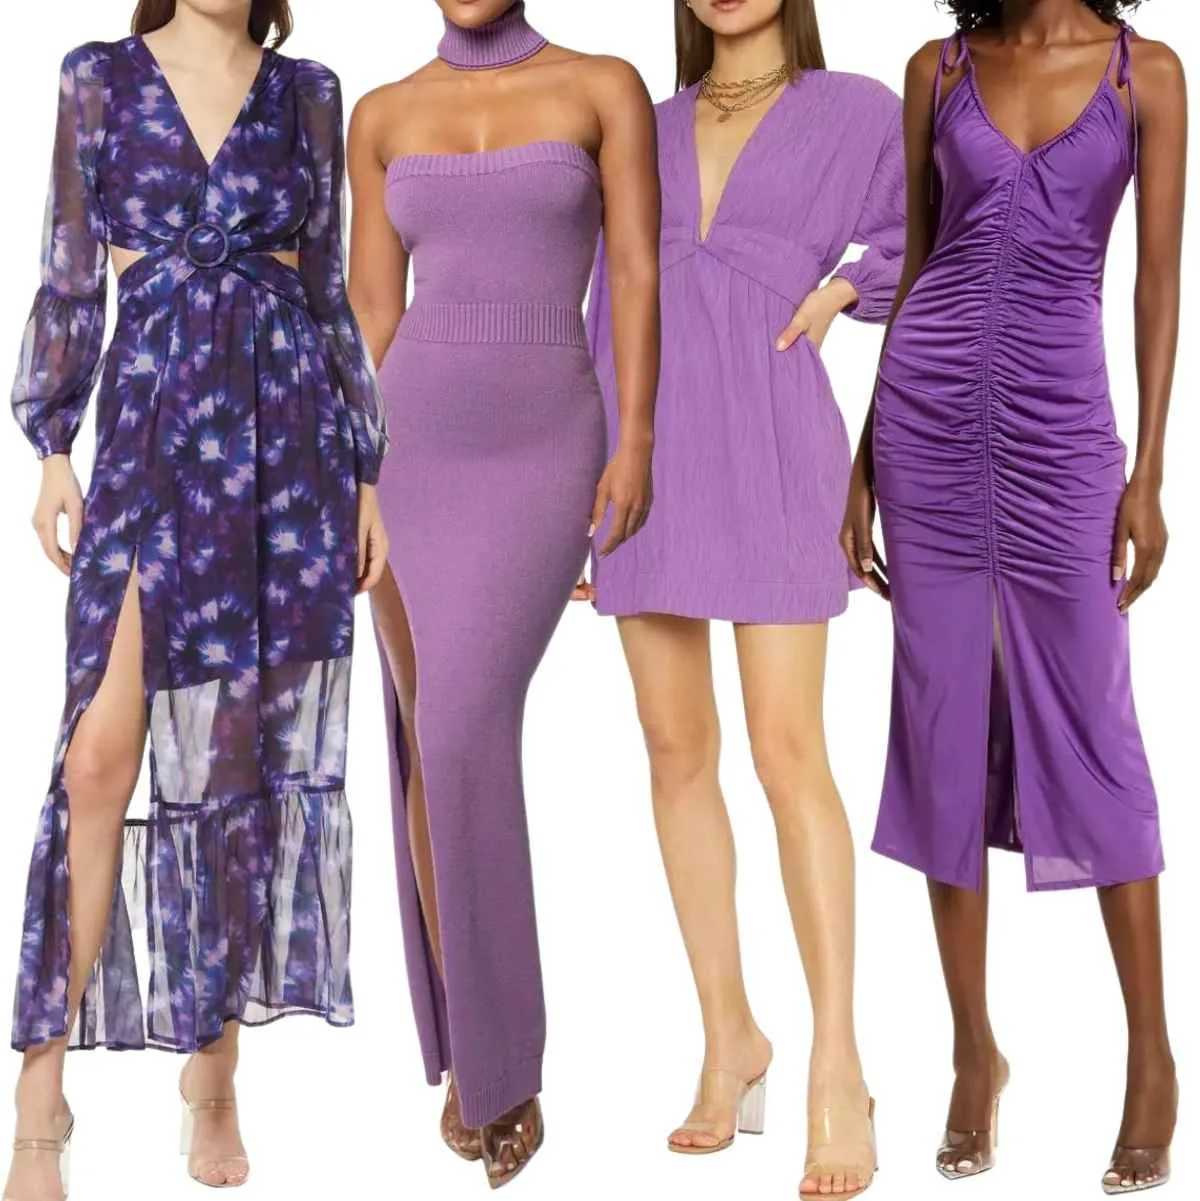 4 women wearing different clear heels and shoes with purple dress outfits.